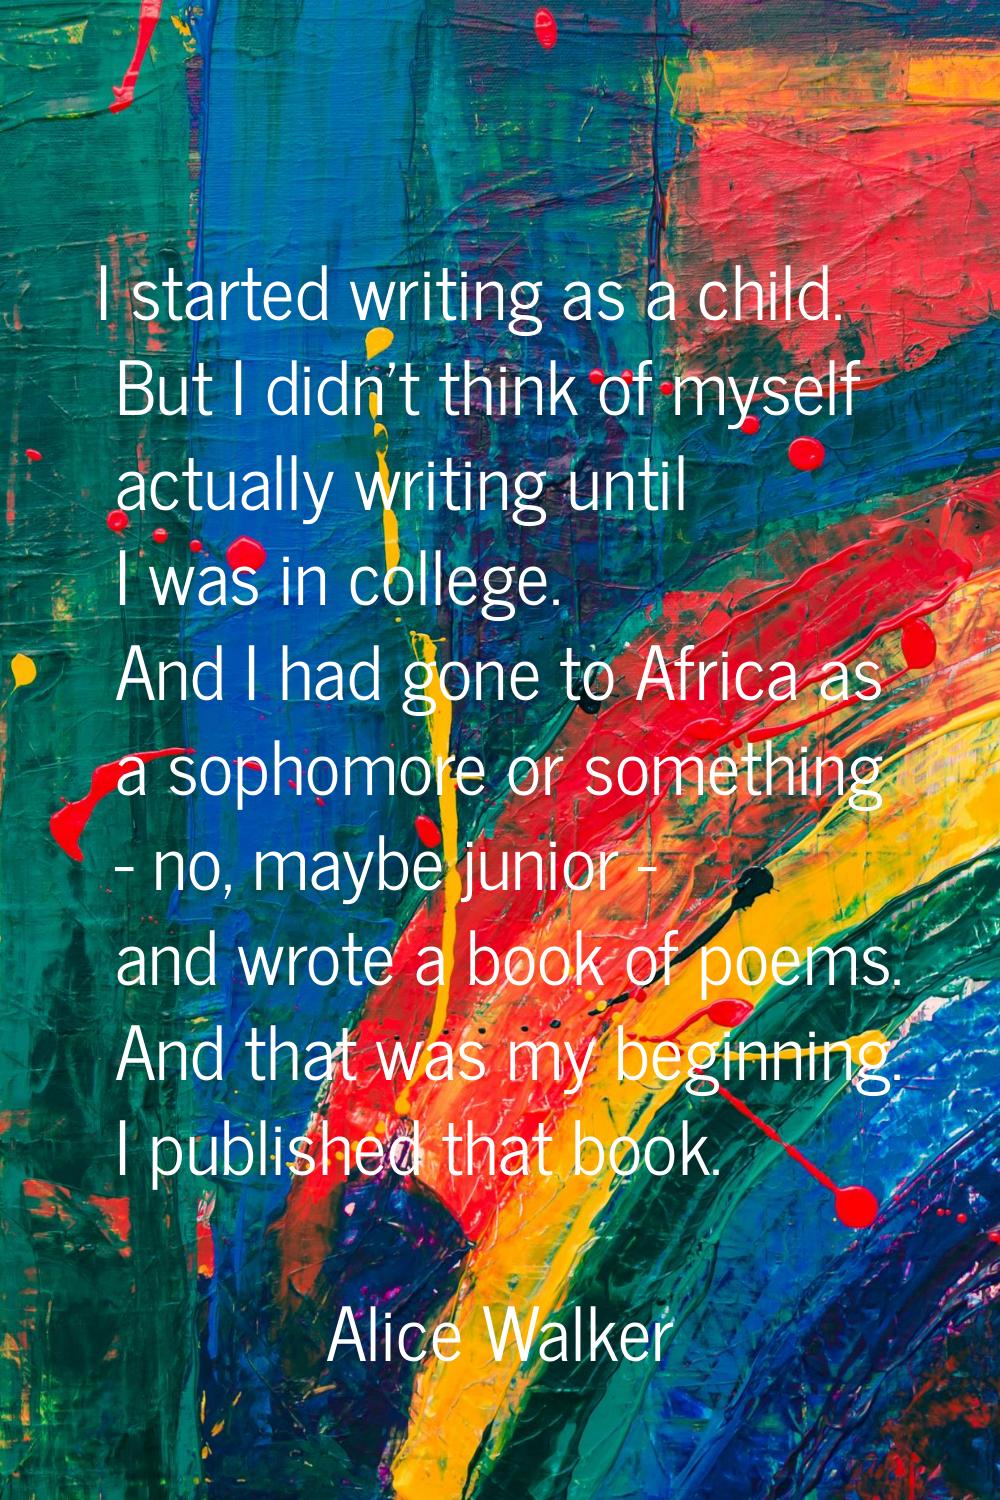 I started writing as a child. But I didn't think of myself actually writing until I was in college.